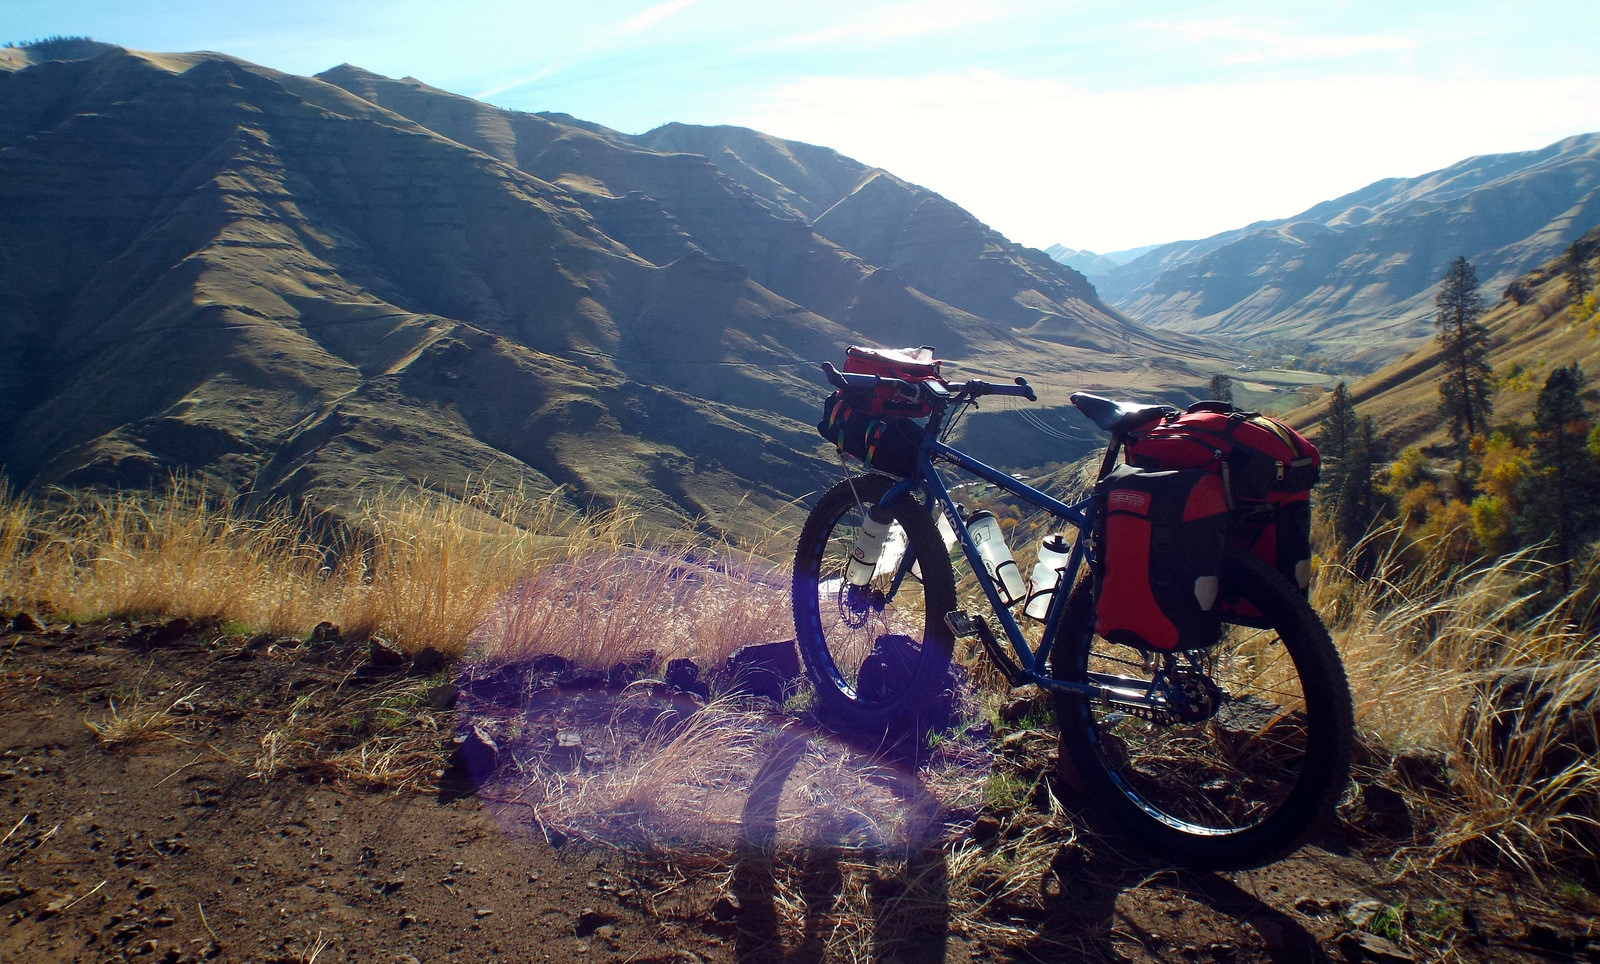 Biking is always one of the top Free Things To Do In Idaho